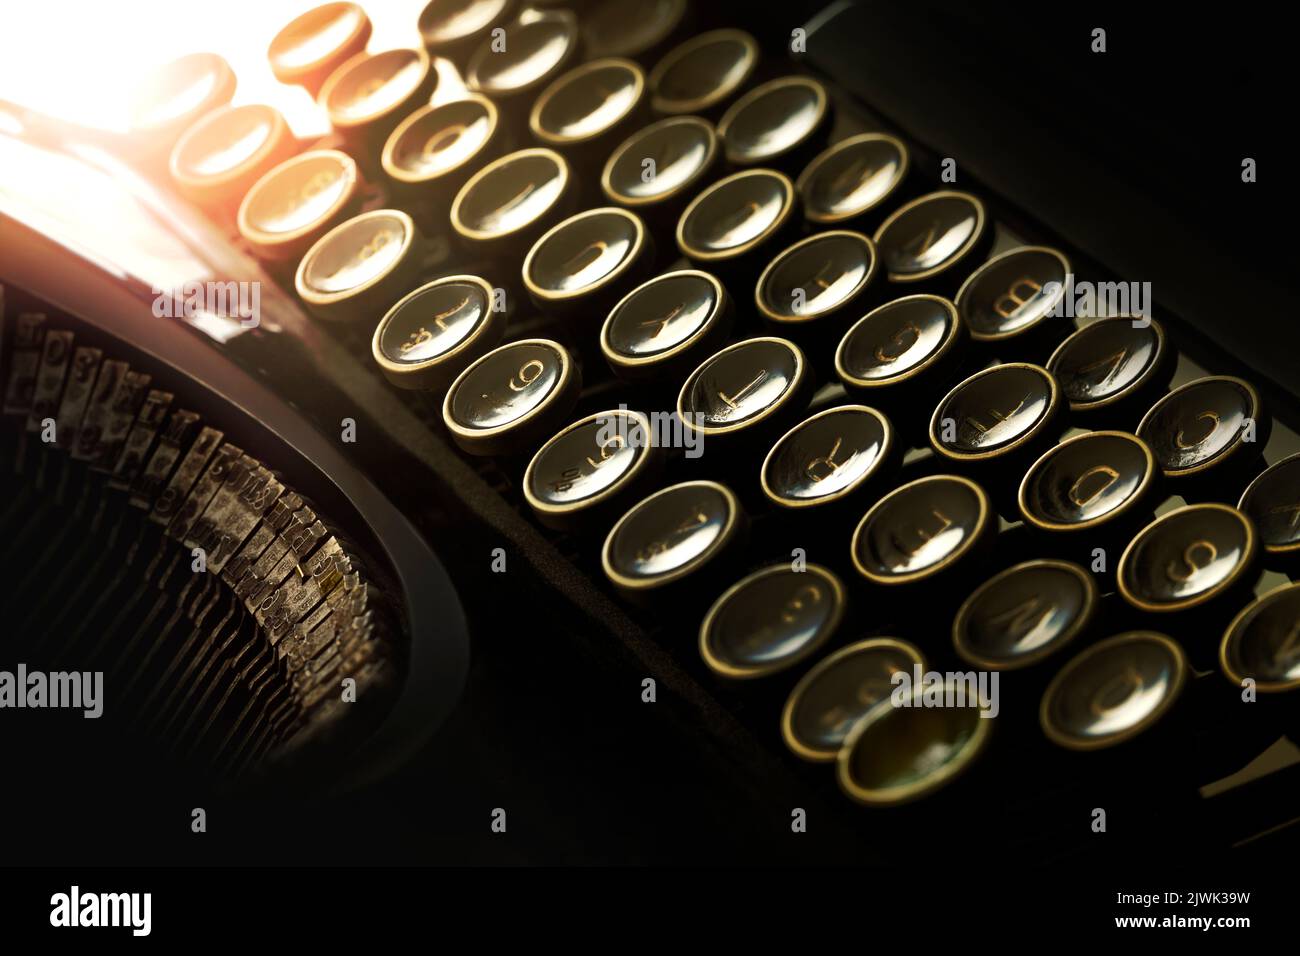 Detail of typewriter keyboard with warmed toned backlight effect. Low key tone ambiance. Stock Photo